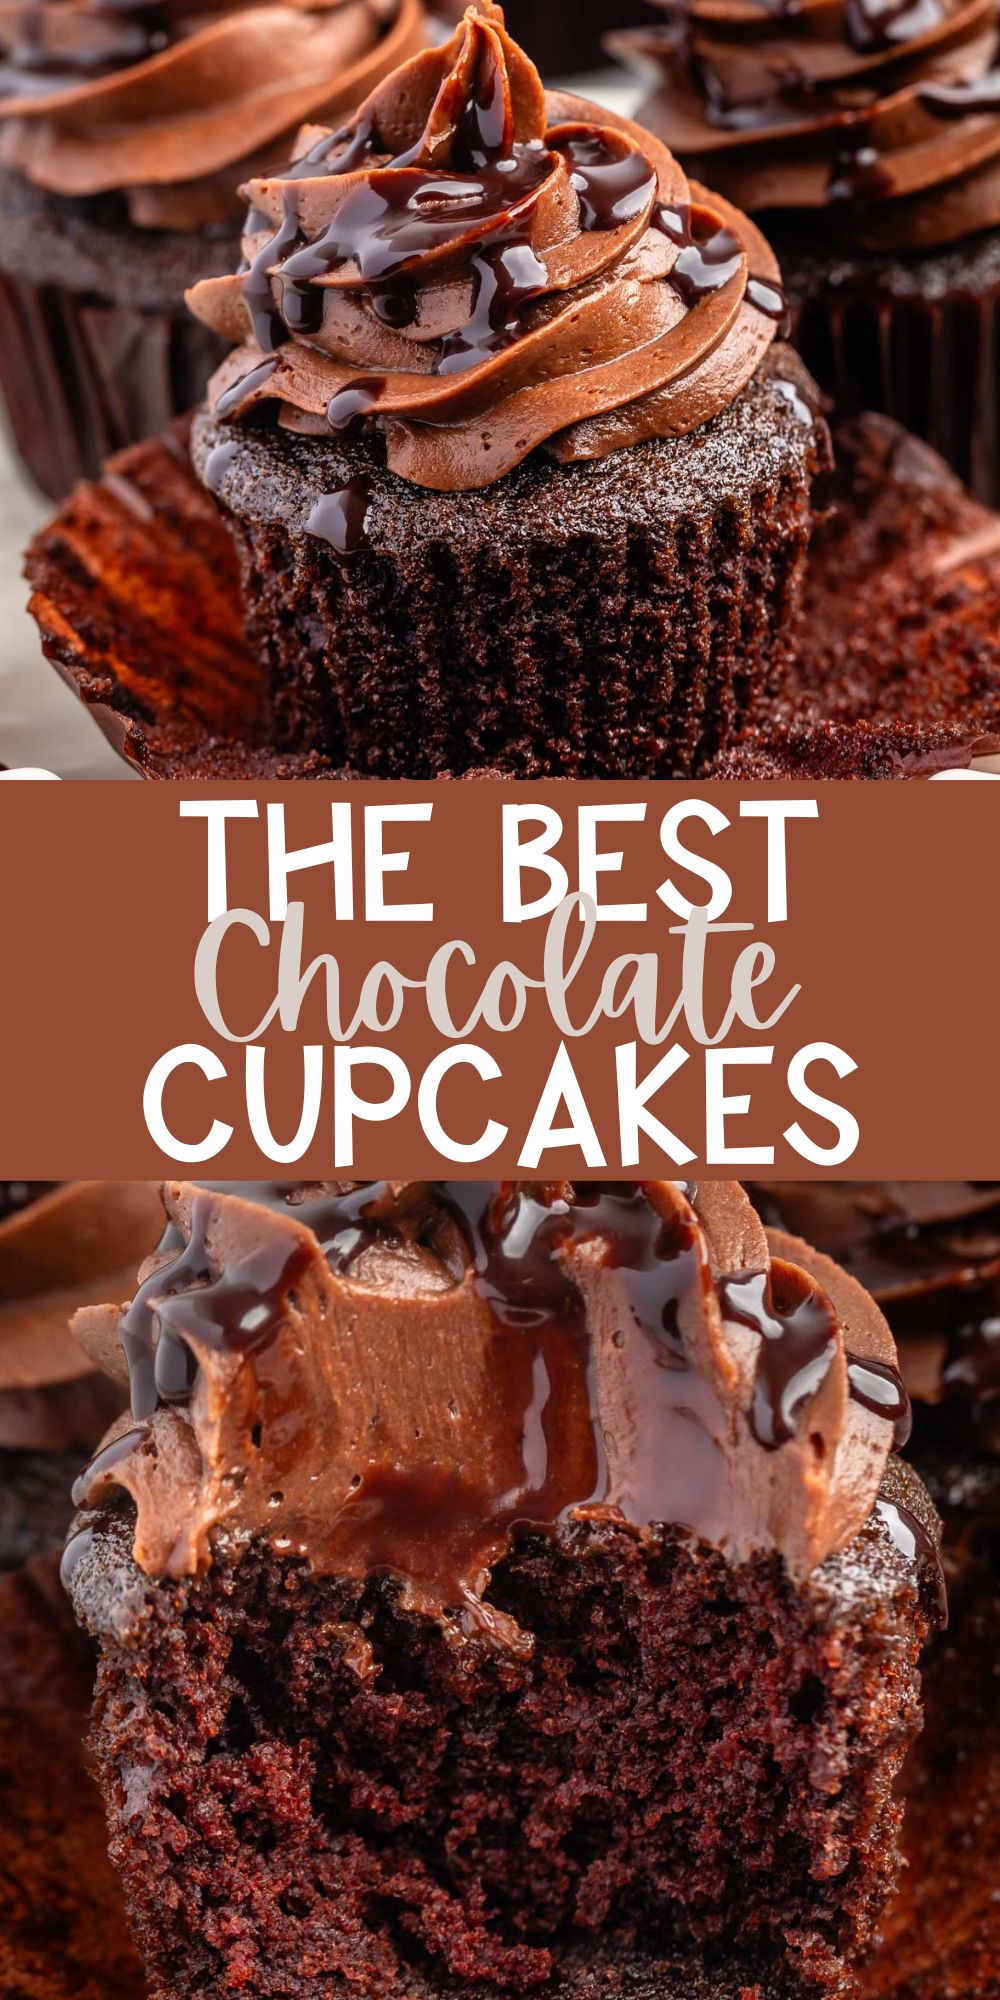 two photos of unwrapped cupcake with chocolate frosting and chocolate sauce drizzled over top with words on the image.